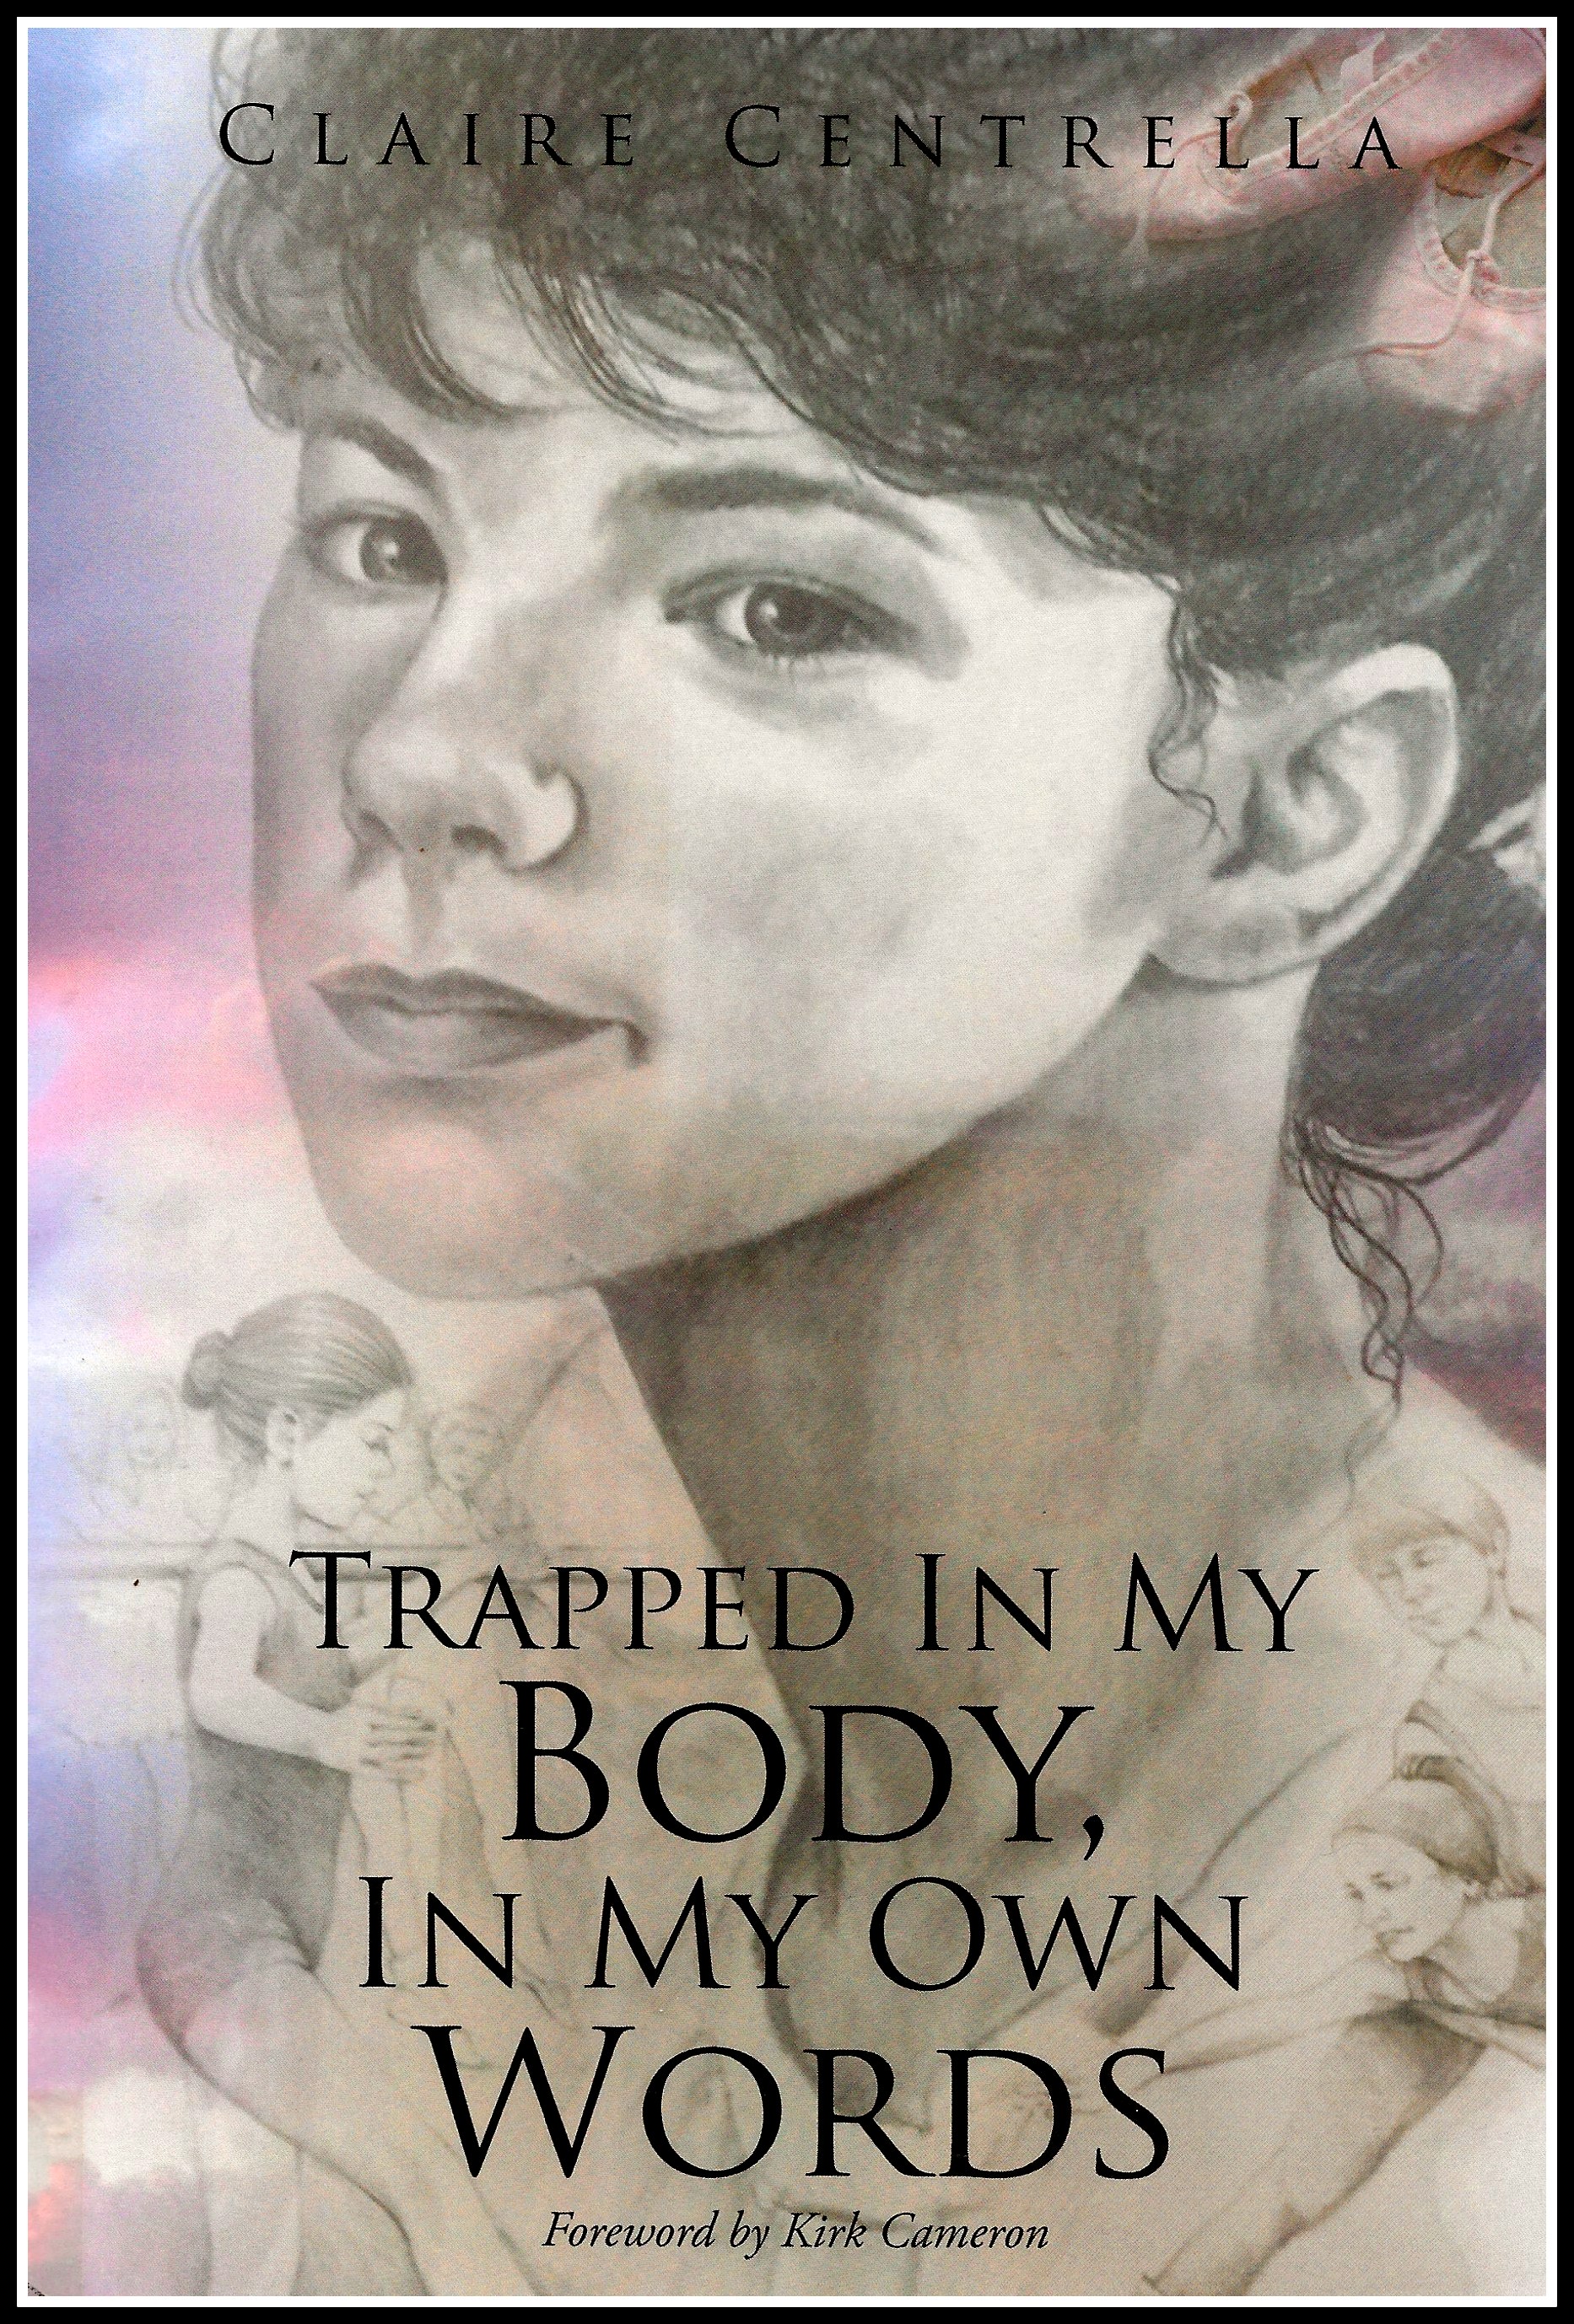 TRAPPED IN MY BODY, IN MY OWN WORDS by Melissa Centrella